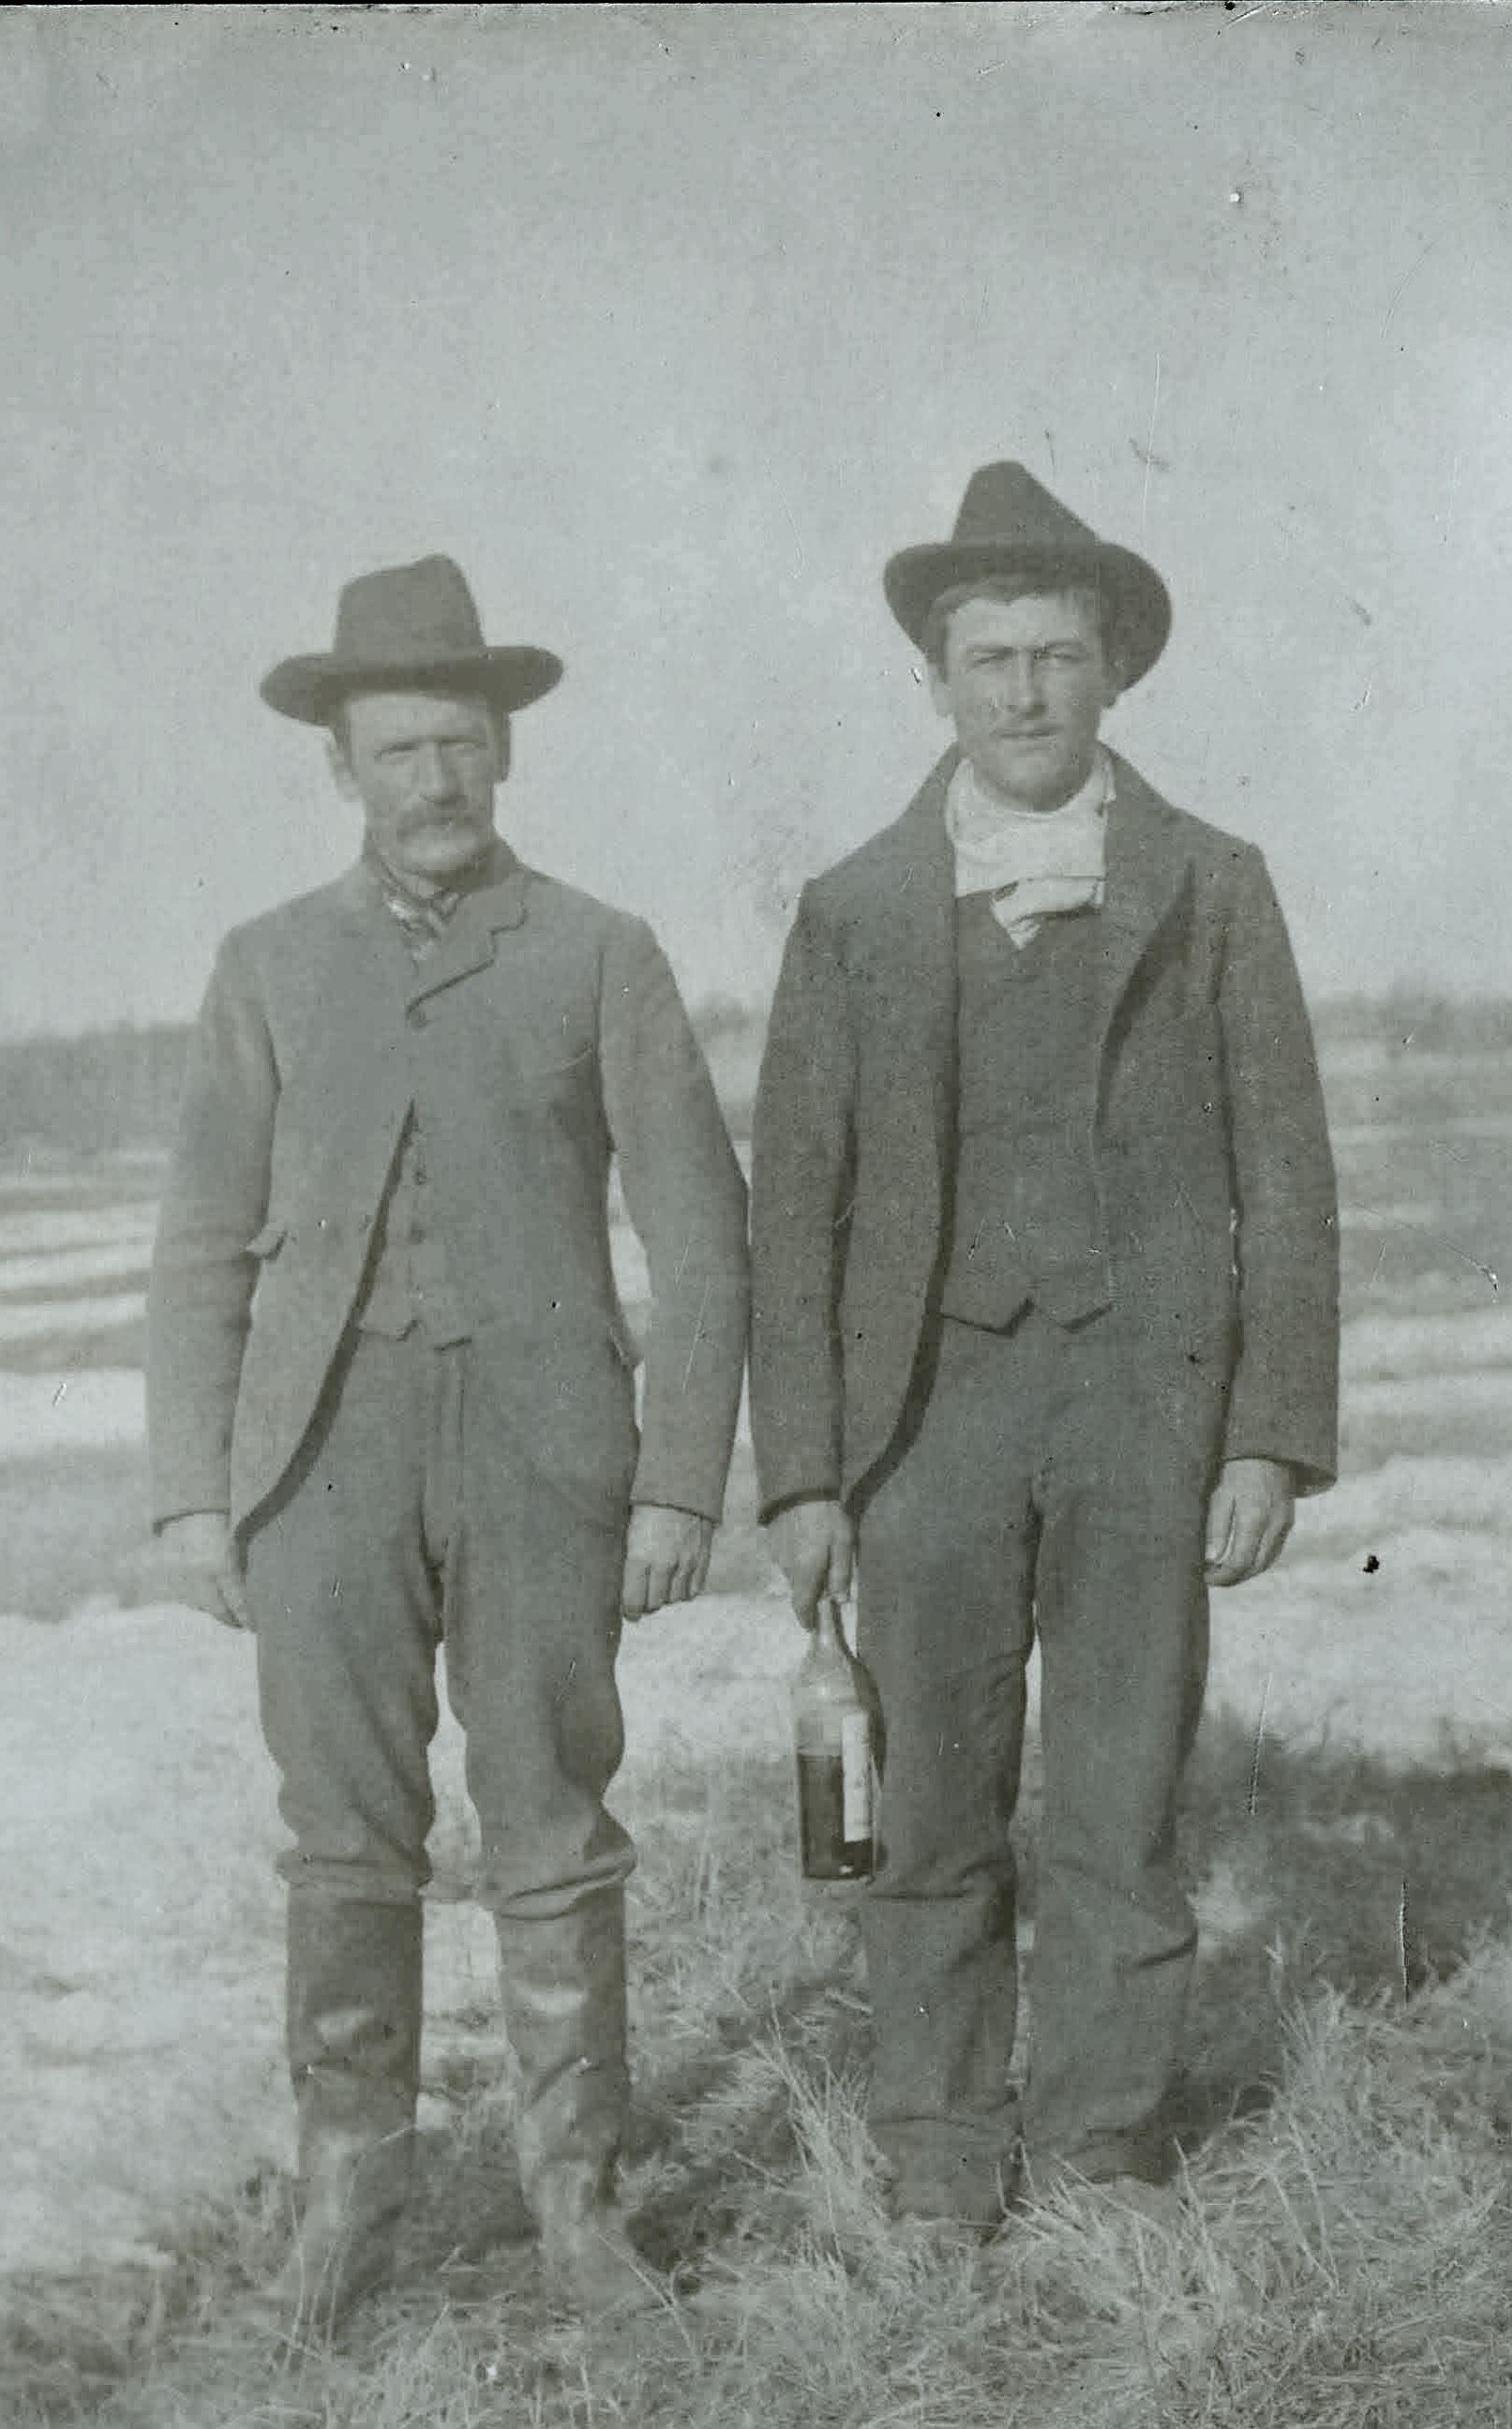 Anyone recognize these two men? There are no leads in the description and very little in the picture so far as we can tell!
990.4.64.01 / McAteer, Noreen